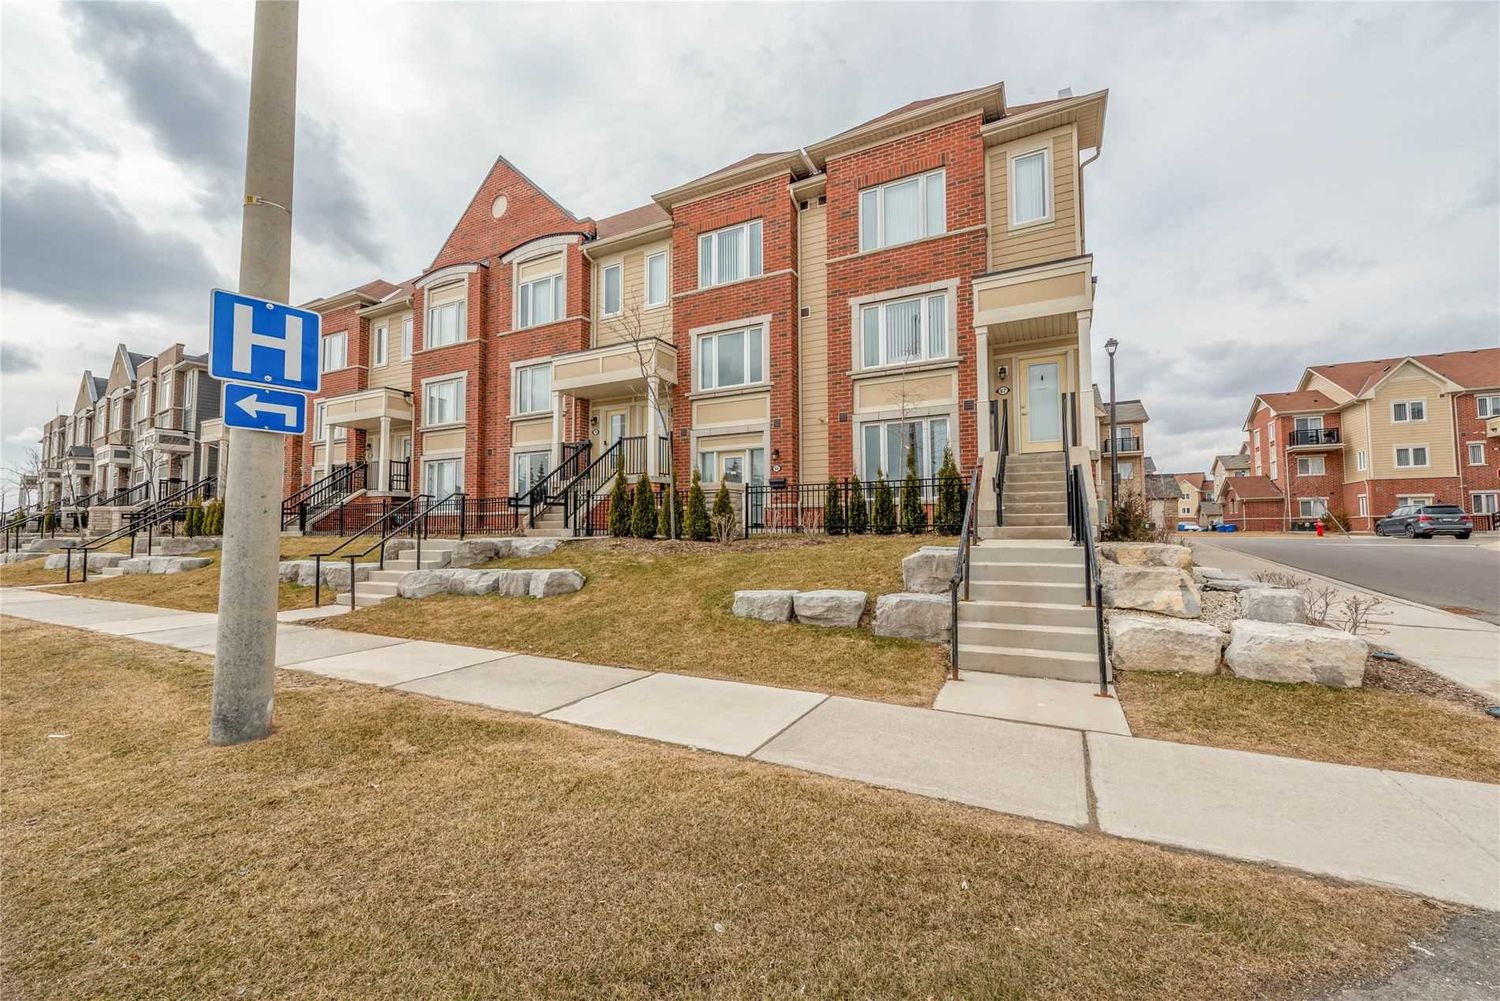 250 Sunny Meadow Boulevard. Sunny Meadow Townhomes is located in  Brampton, Toronto - image #1 of 3